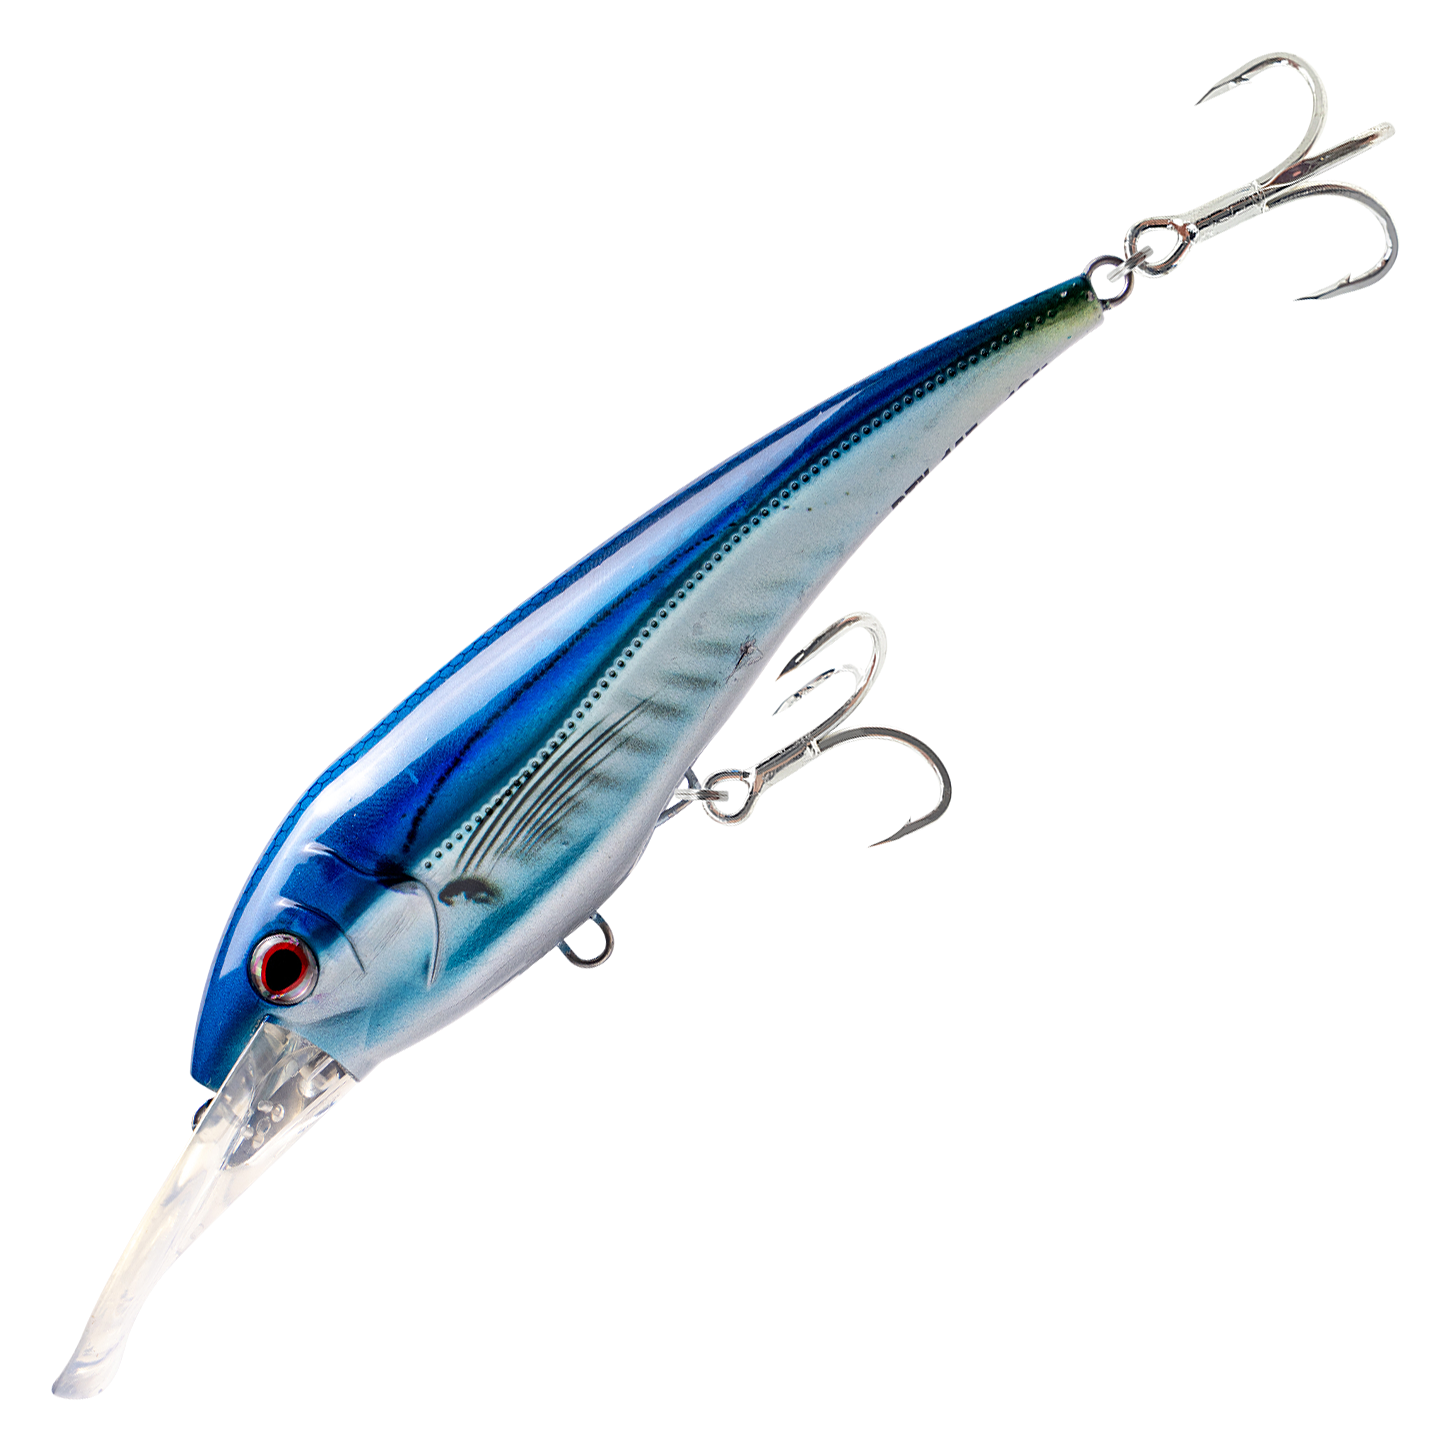 Nomad Design DTX Minnow Floating Lure - 120mm - 35g - White Glow - Melton  Tackle